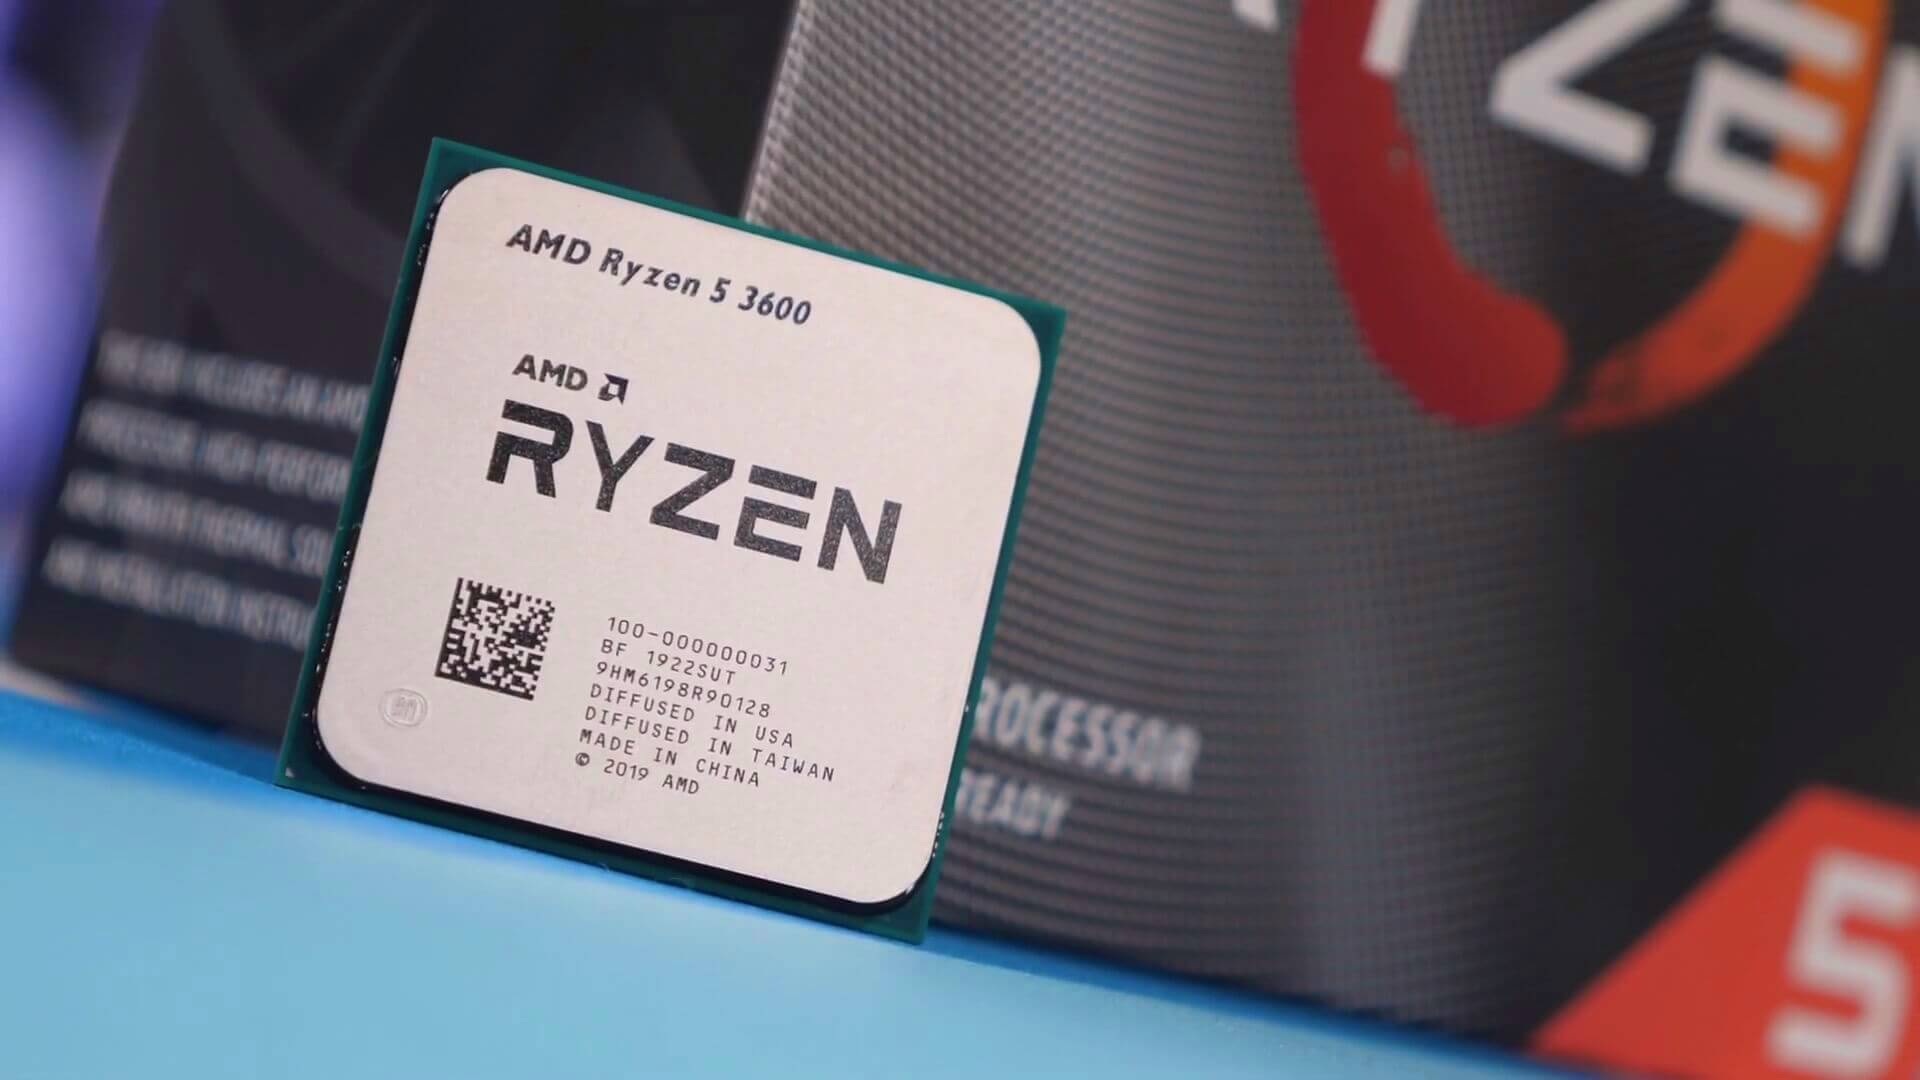 Take a look at the different models of ADM Ryzen